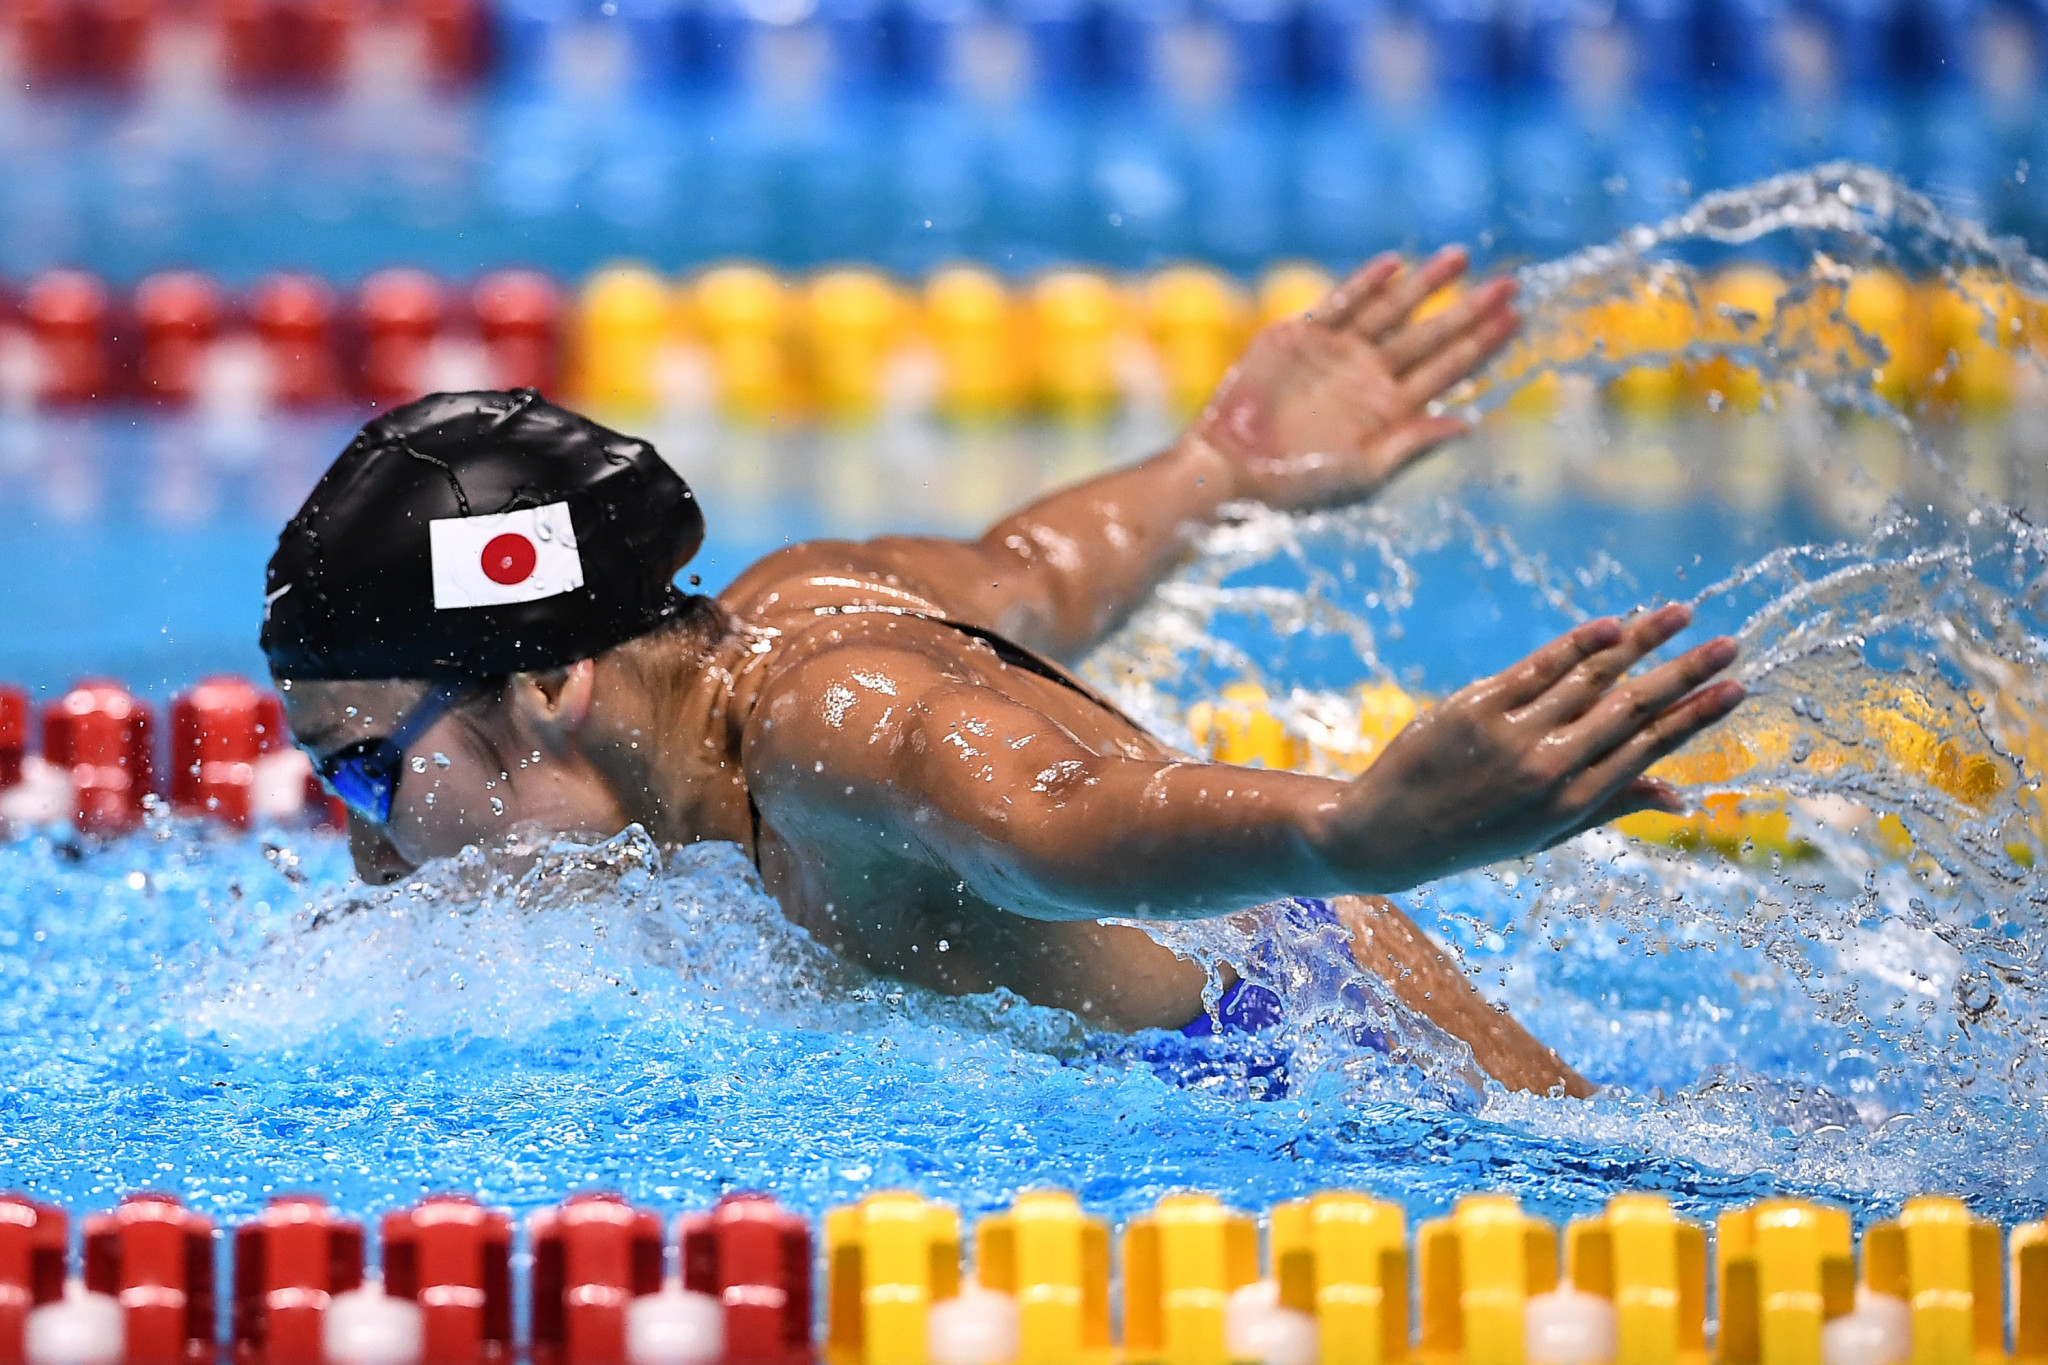 Rikako Ikee set Asian Games records in all six of her gold medal wins ©Getty Images